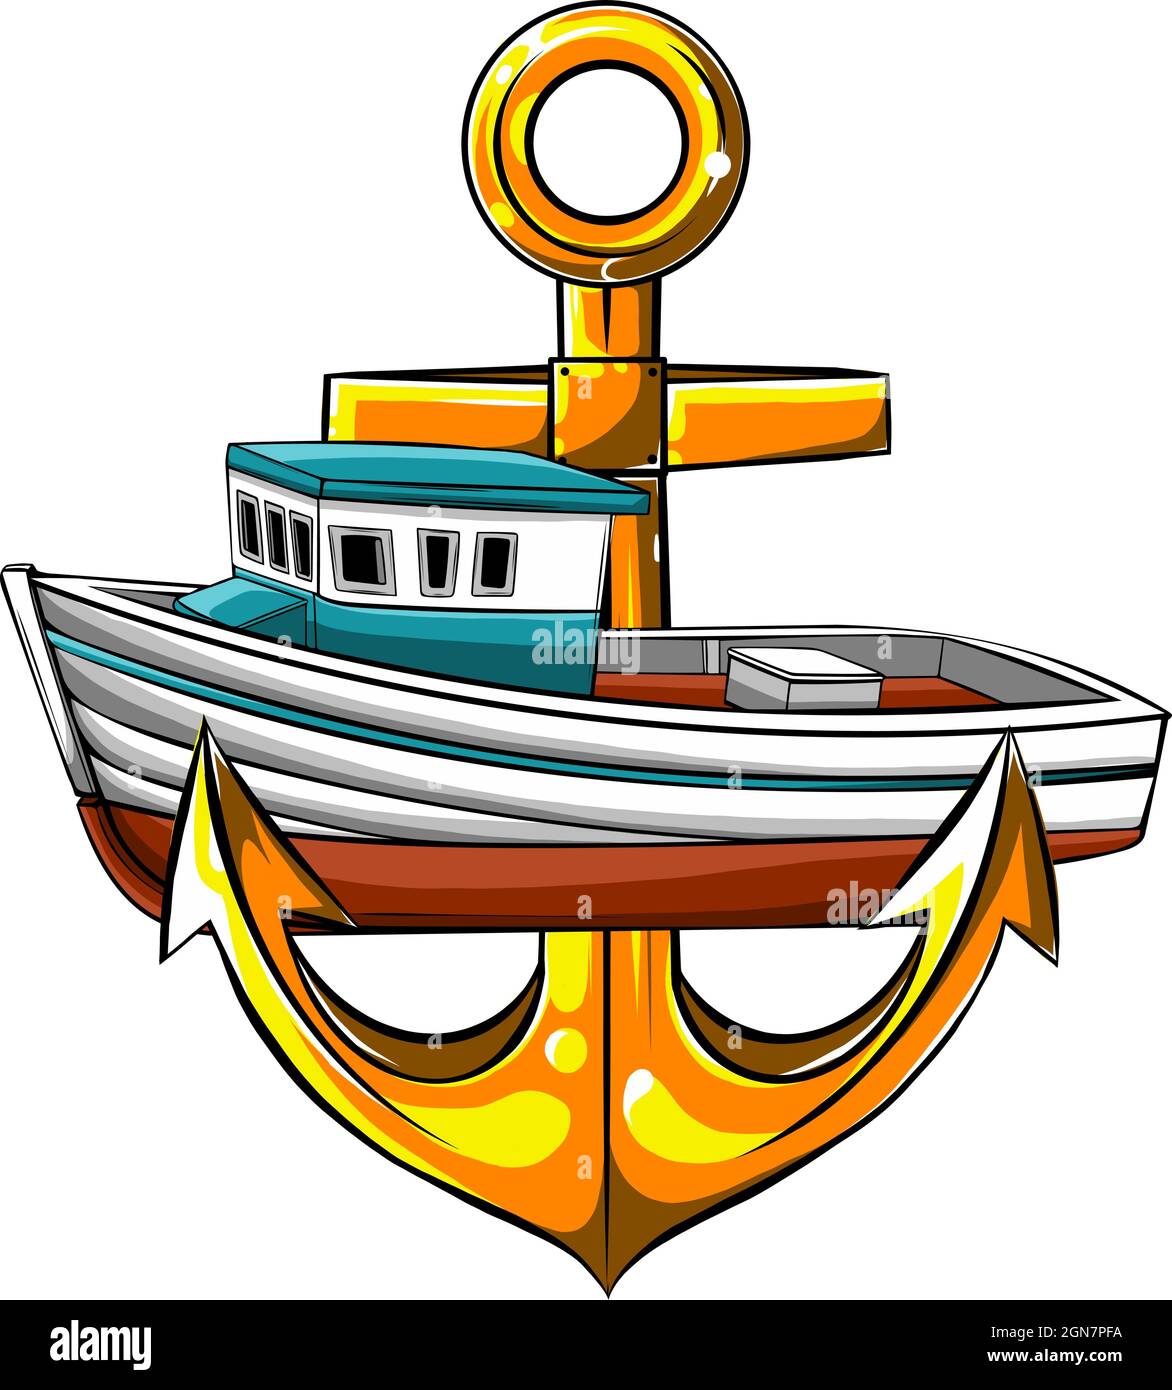 vector illustration of fish-boat with anchor cartoon caricature